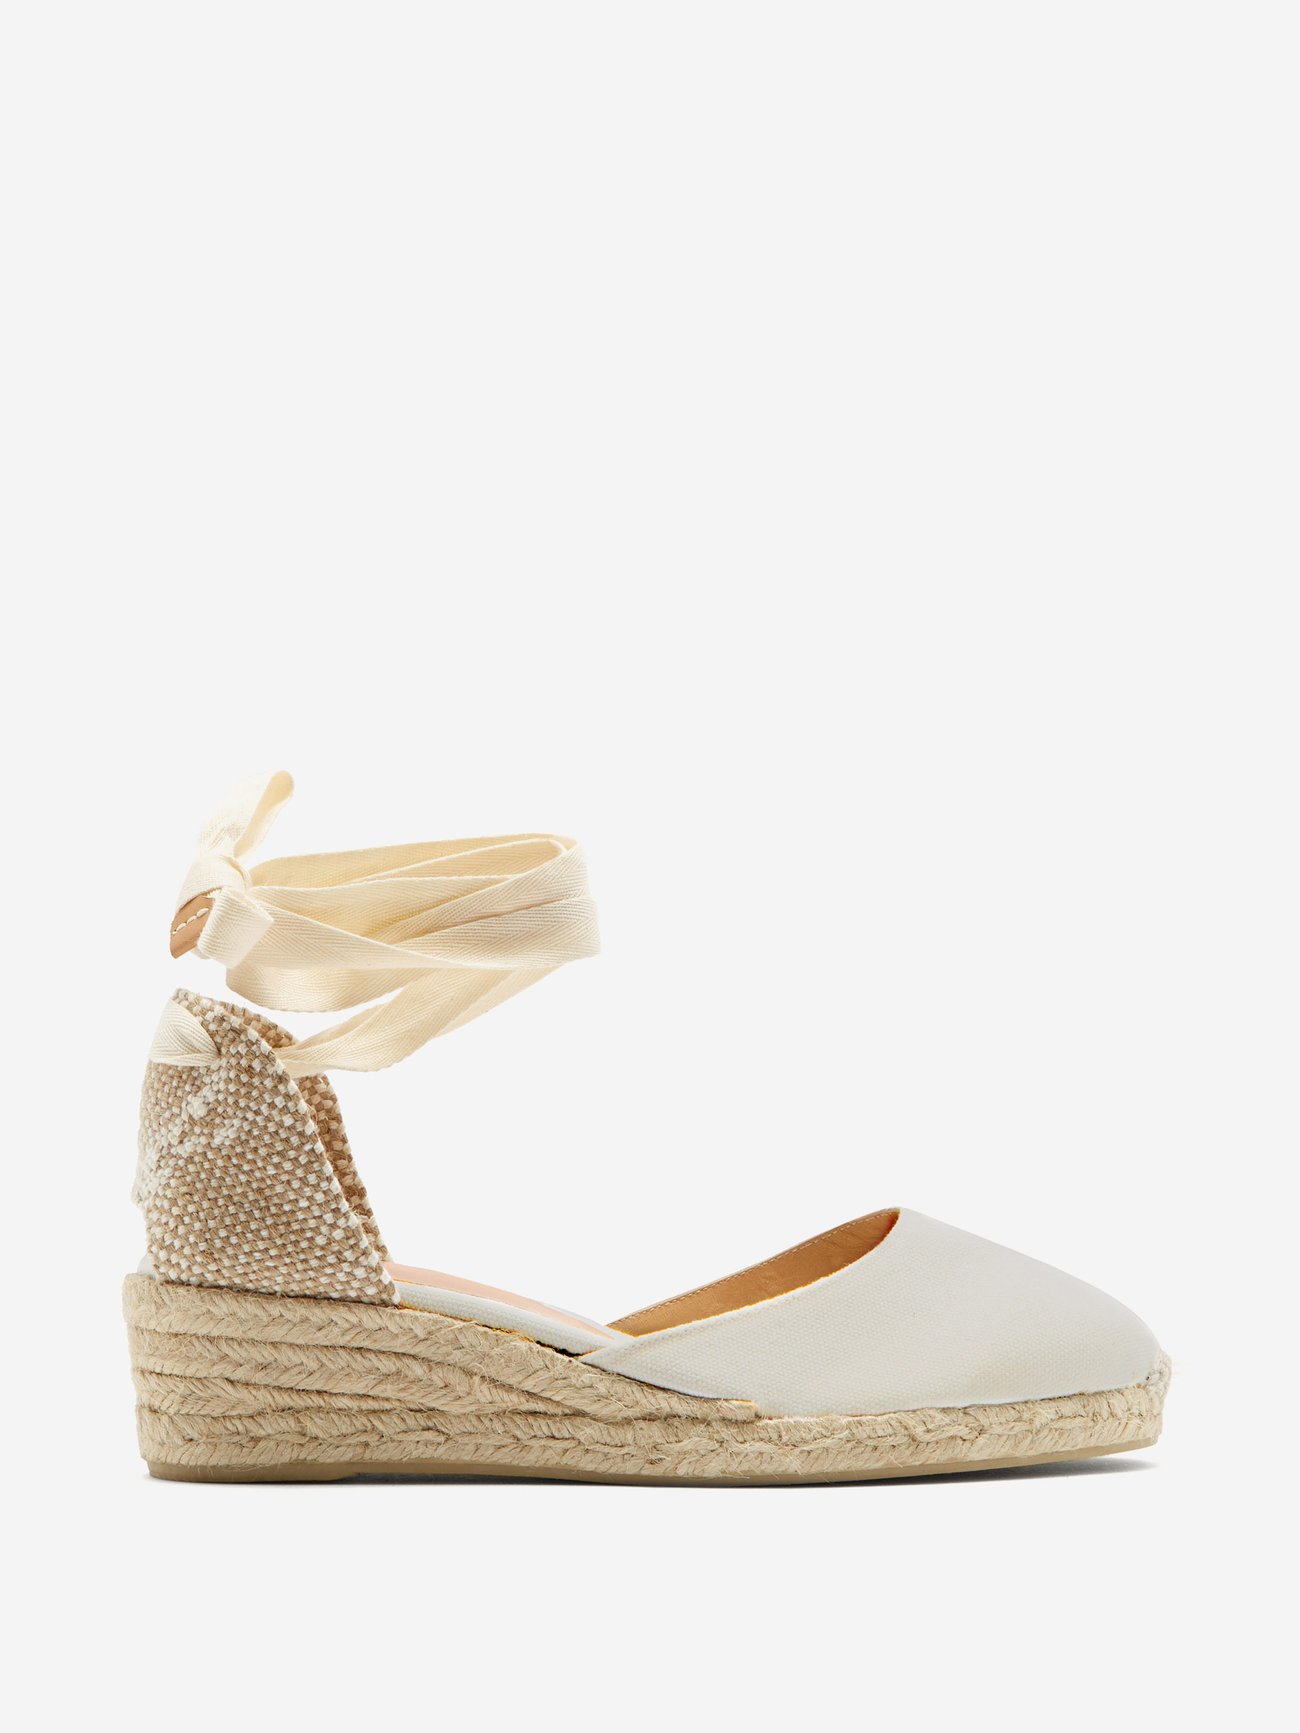 Castañer Espadrilles: The Shoe Every Fashion Editor Wants | Who What ...